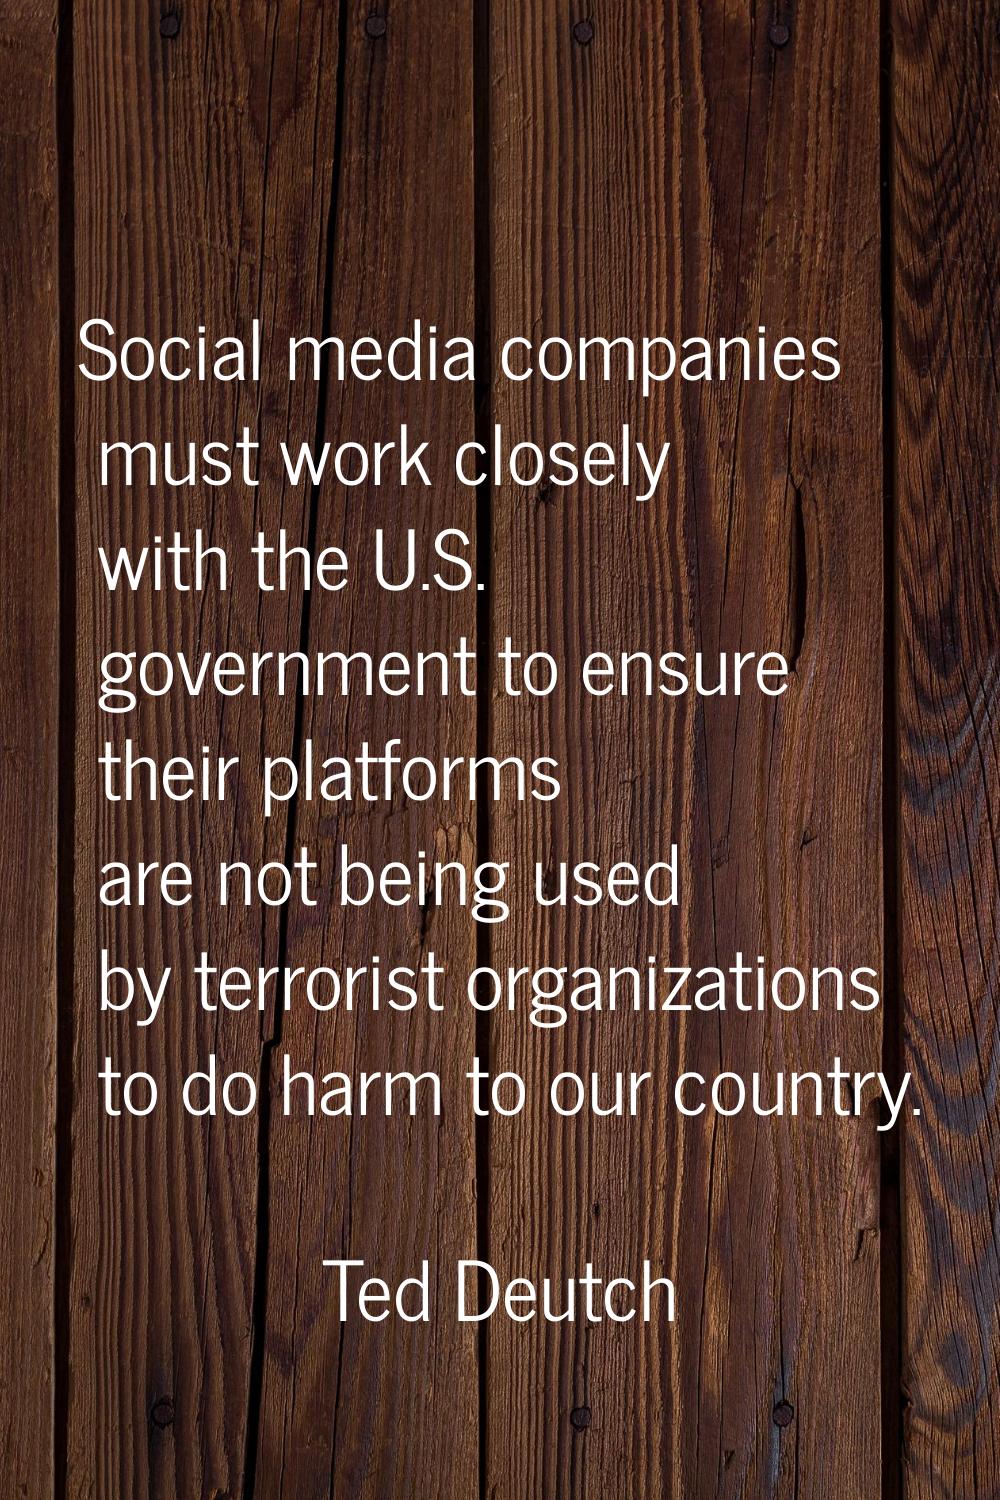 Social media companies must work closely with the U.S. government to ensure their platforms are not